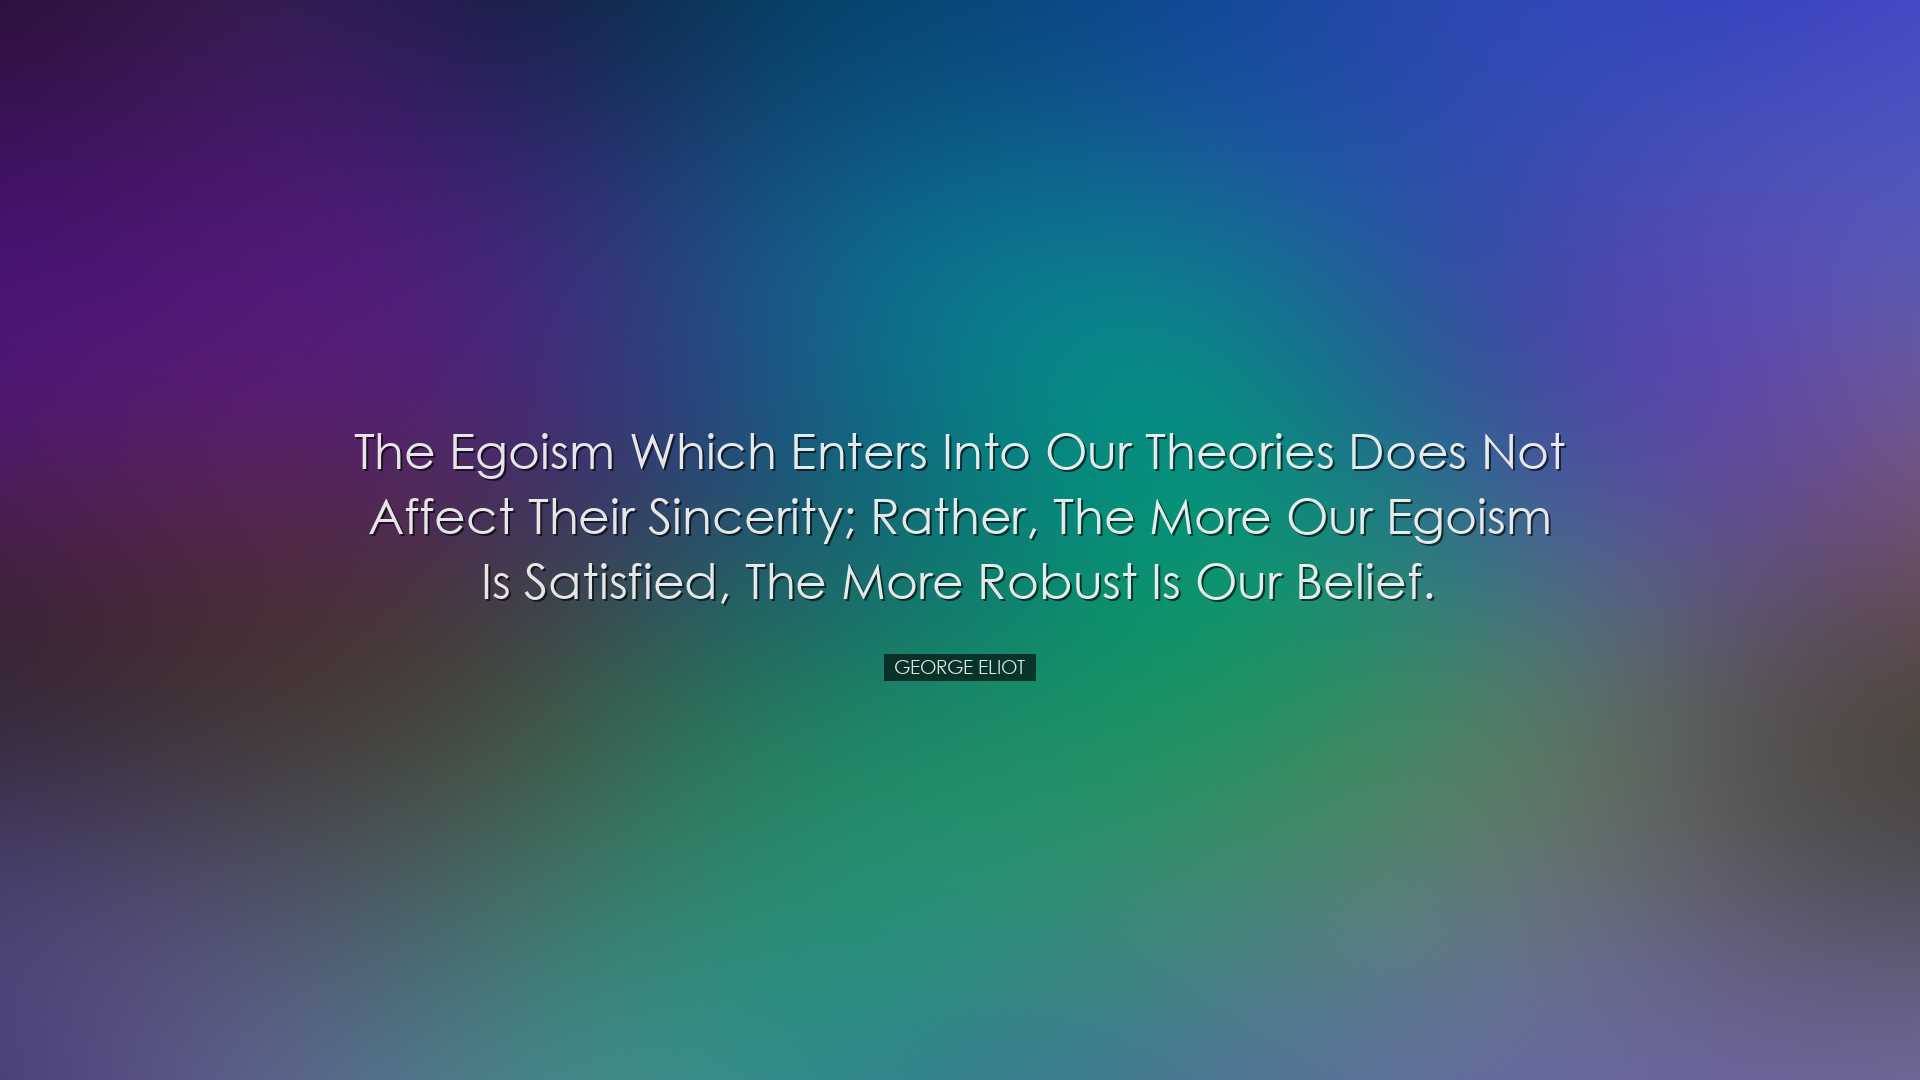 The egoism which enters into our theories does not affect their si